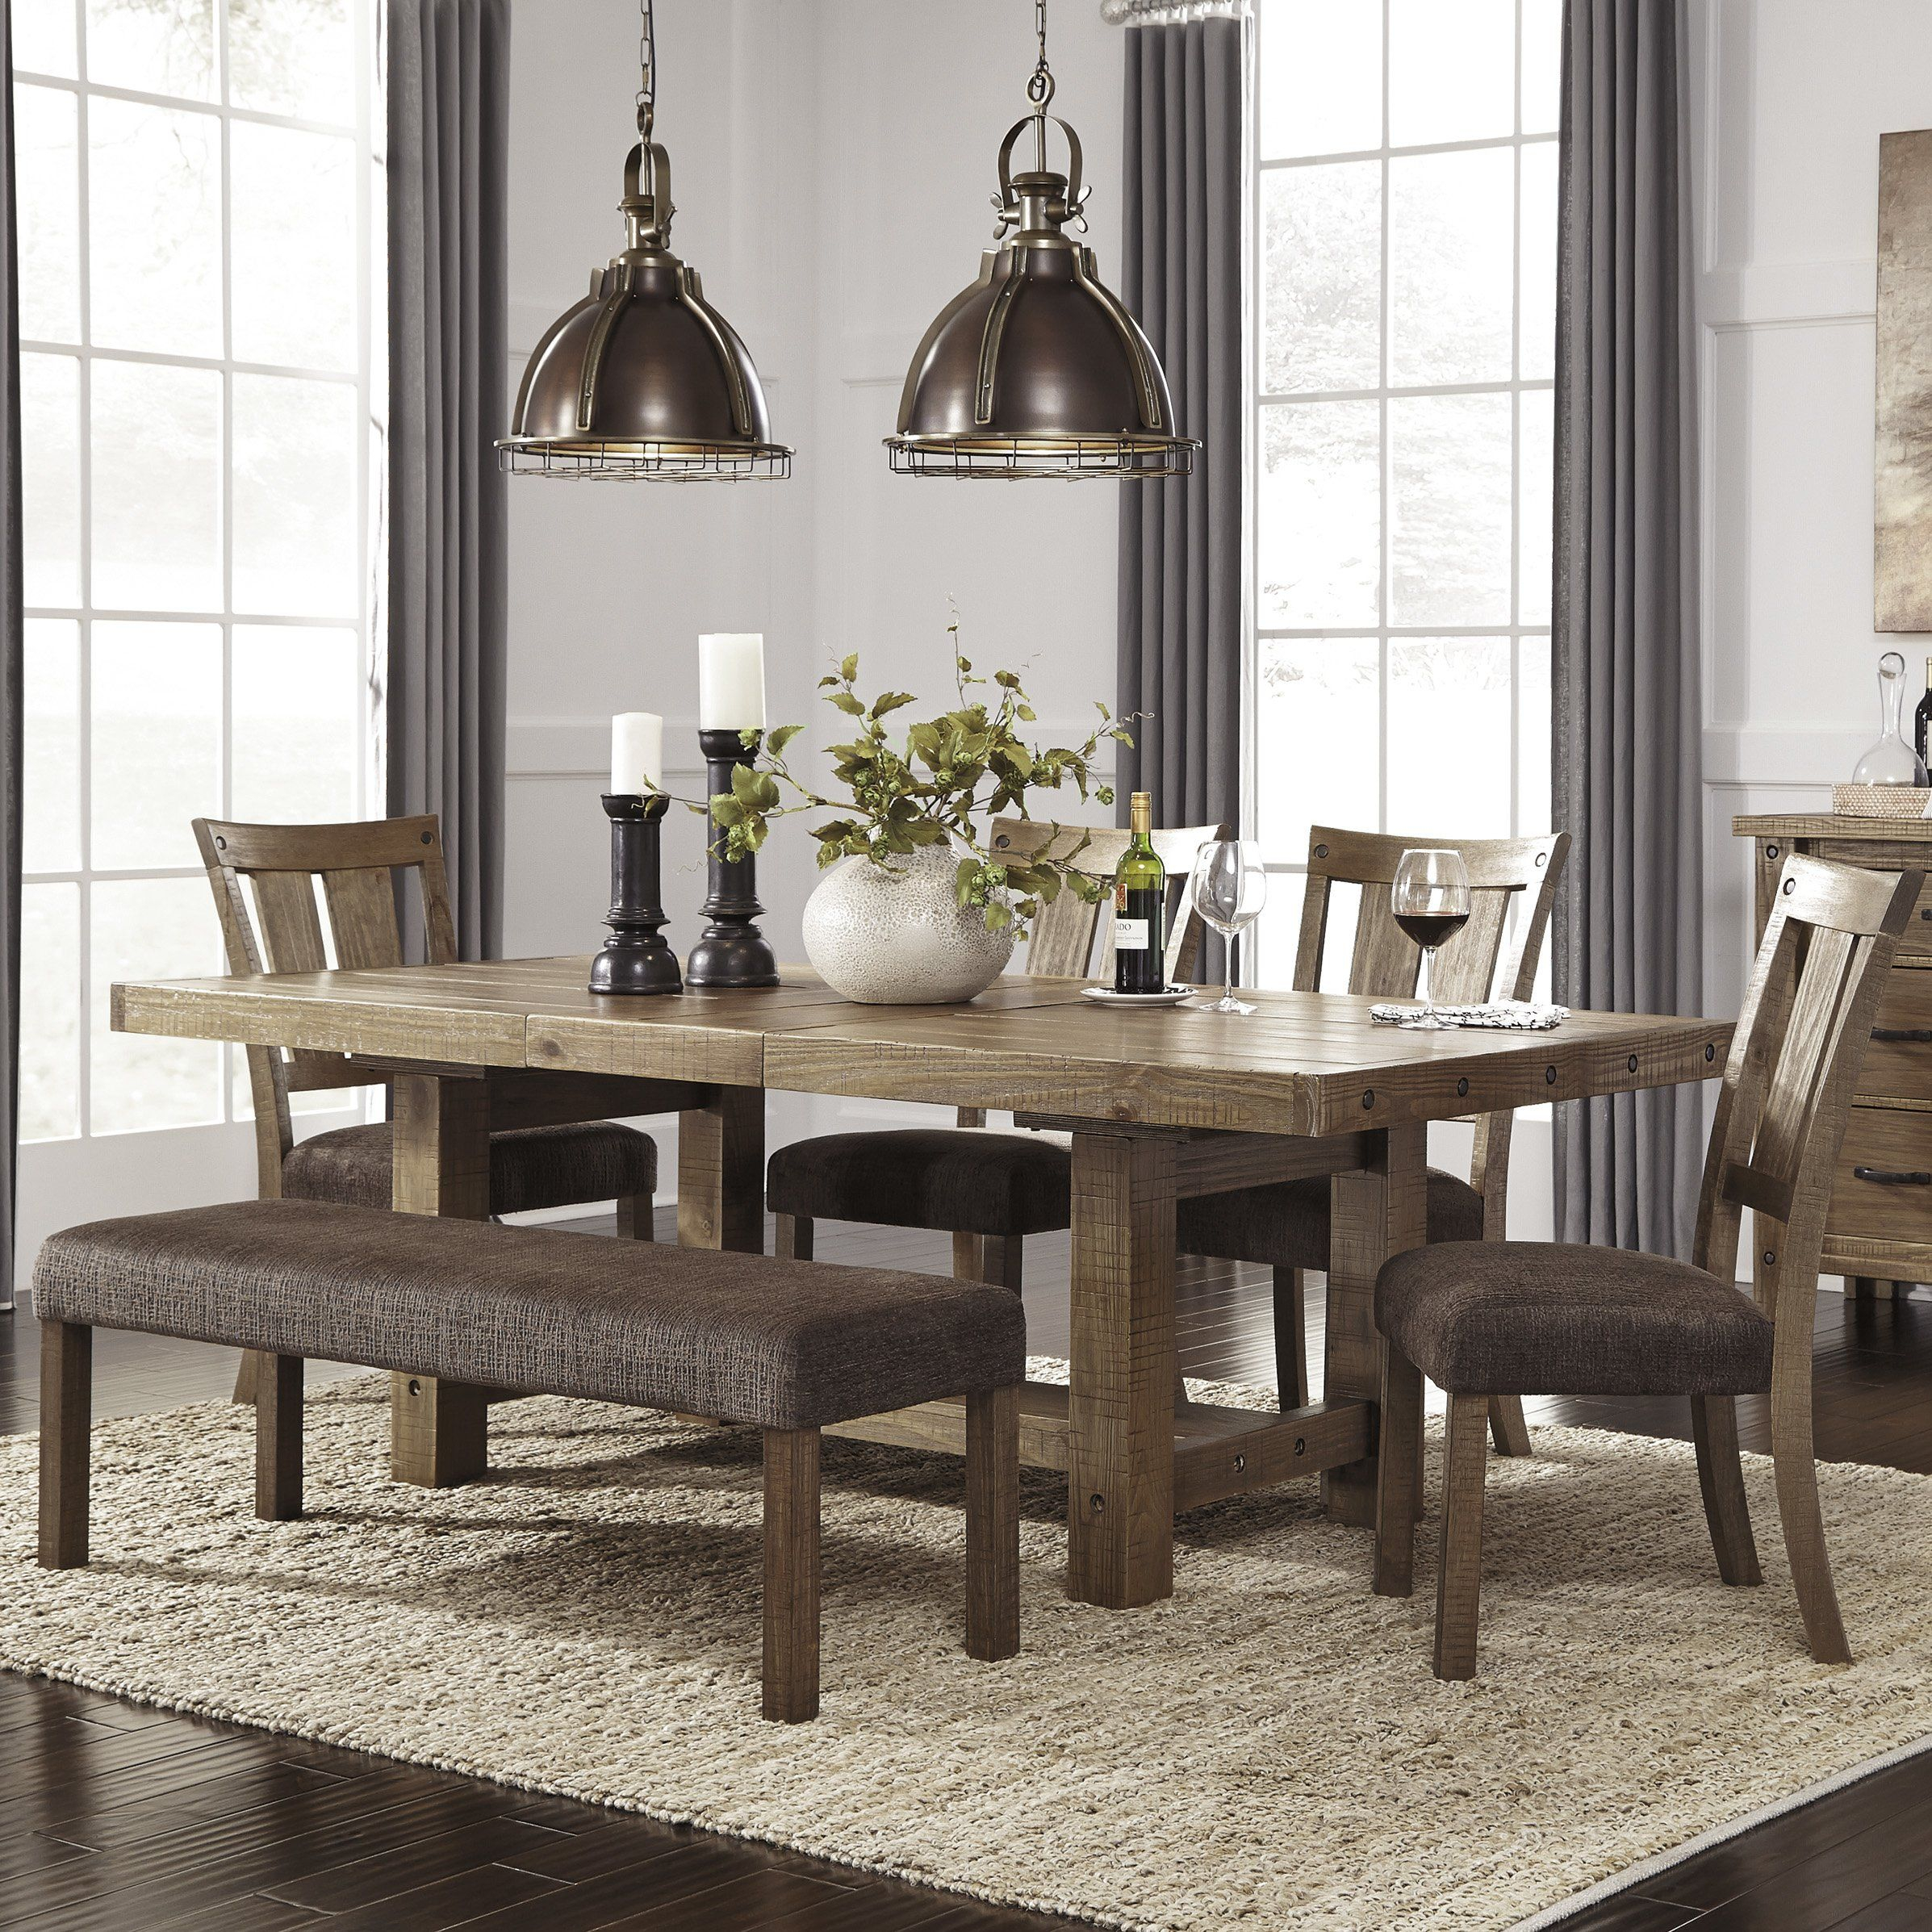 Small Dining Room Set For 6 • Faucet Ideas Site